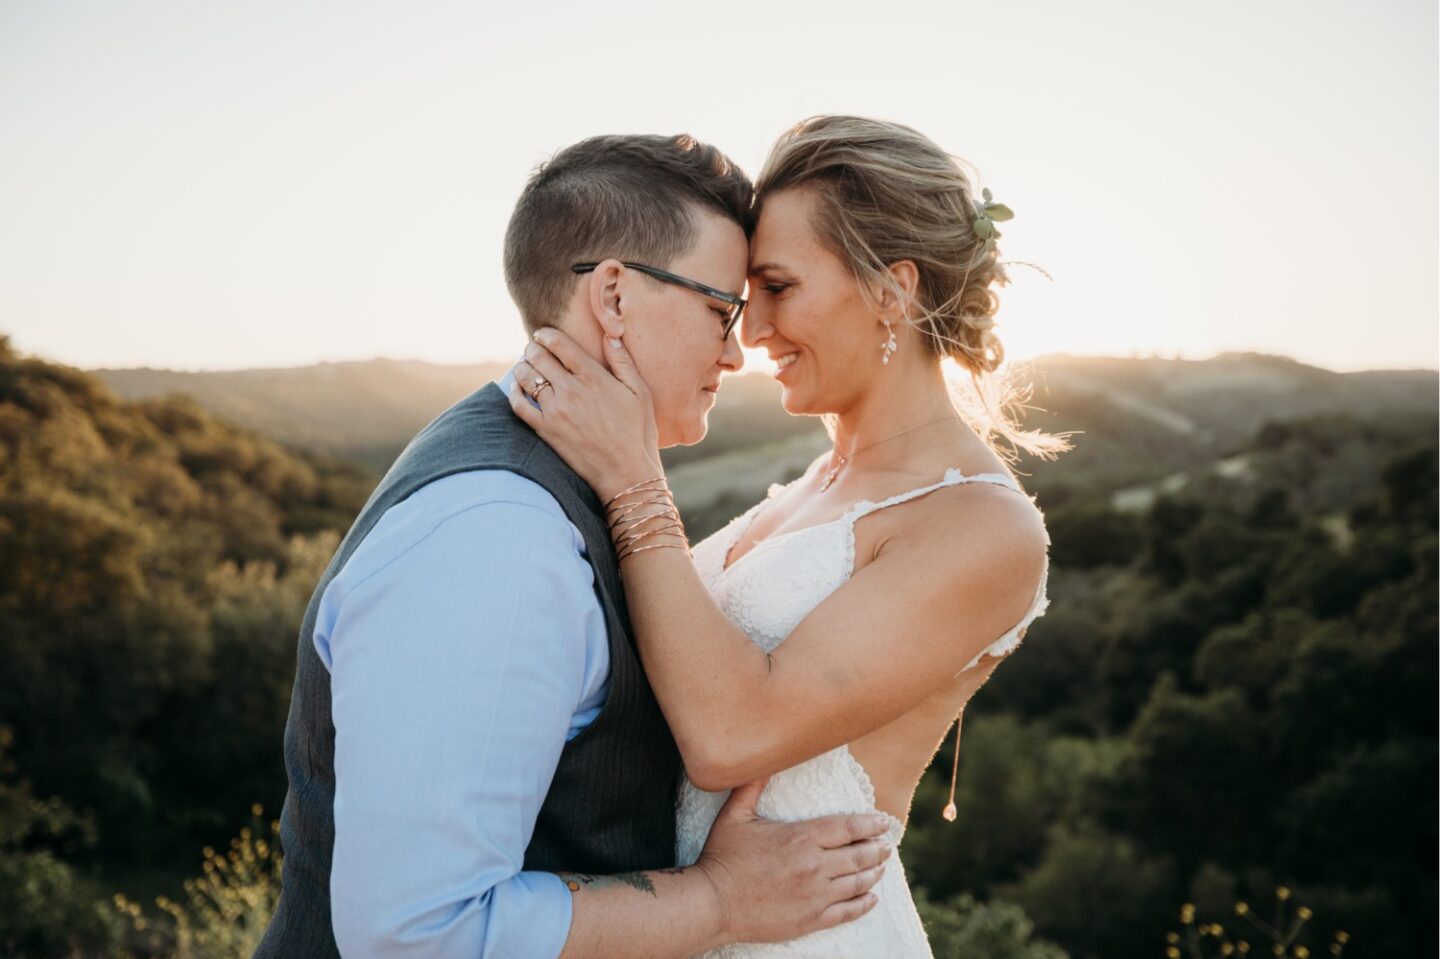 Couple embraces while touching foreheads overlooking the Paso Robles vineyards at sunset. Liz Koston Photography.